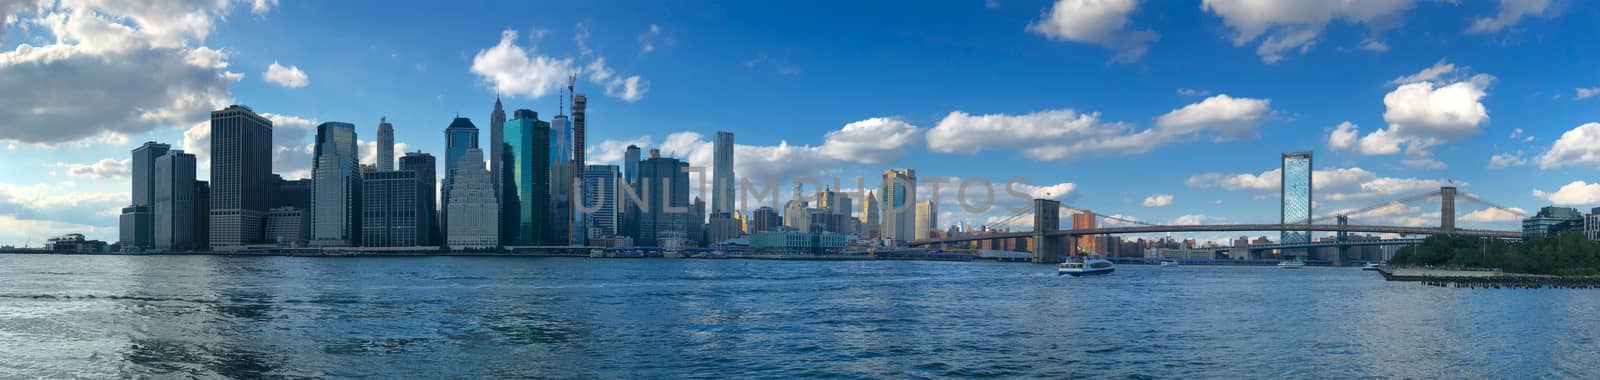 Panoramic view of Manhattan Skyline, with Financial District and World Trade Center, New York, USA. by Bonandbon